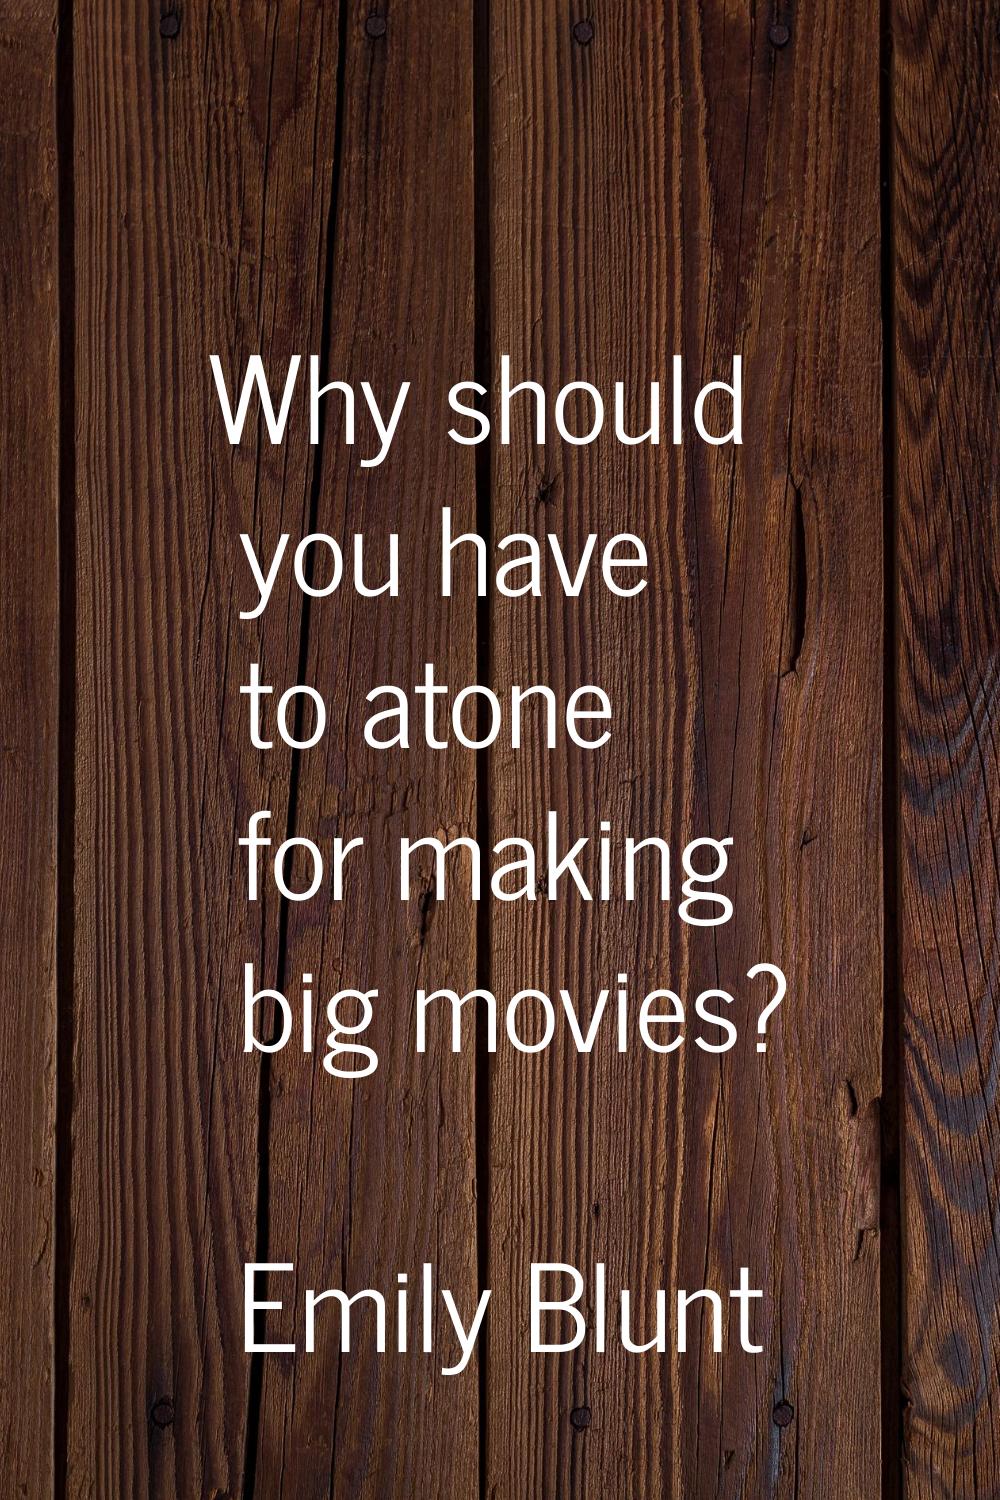 Why should you have to atone for making big movies?